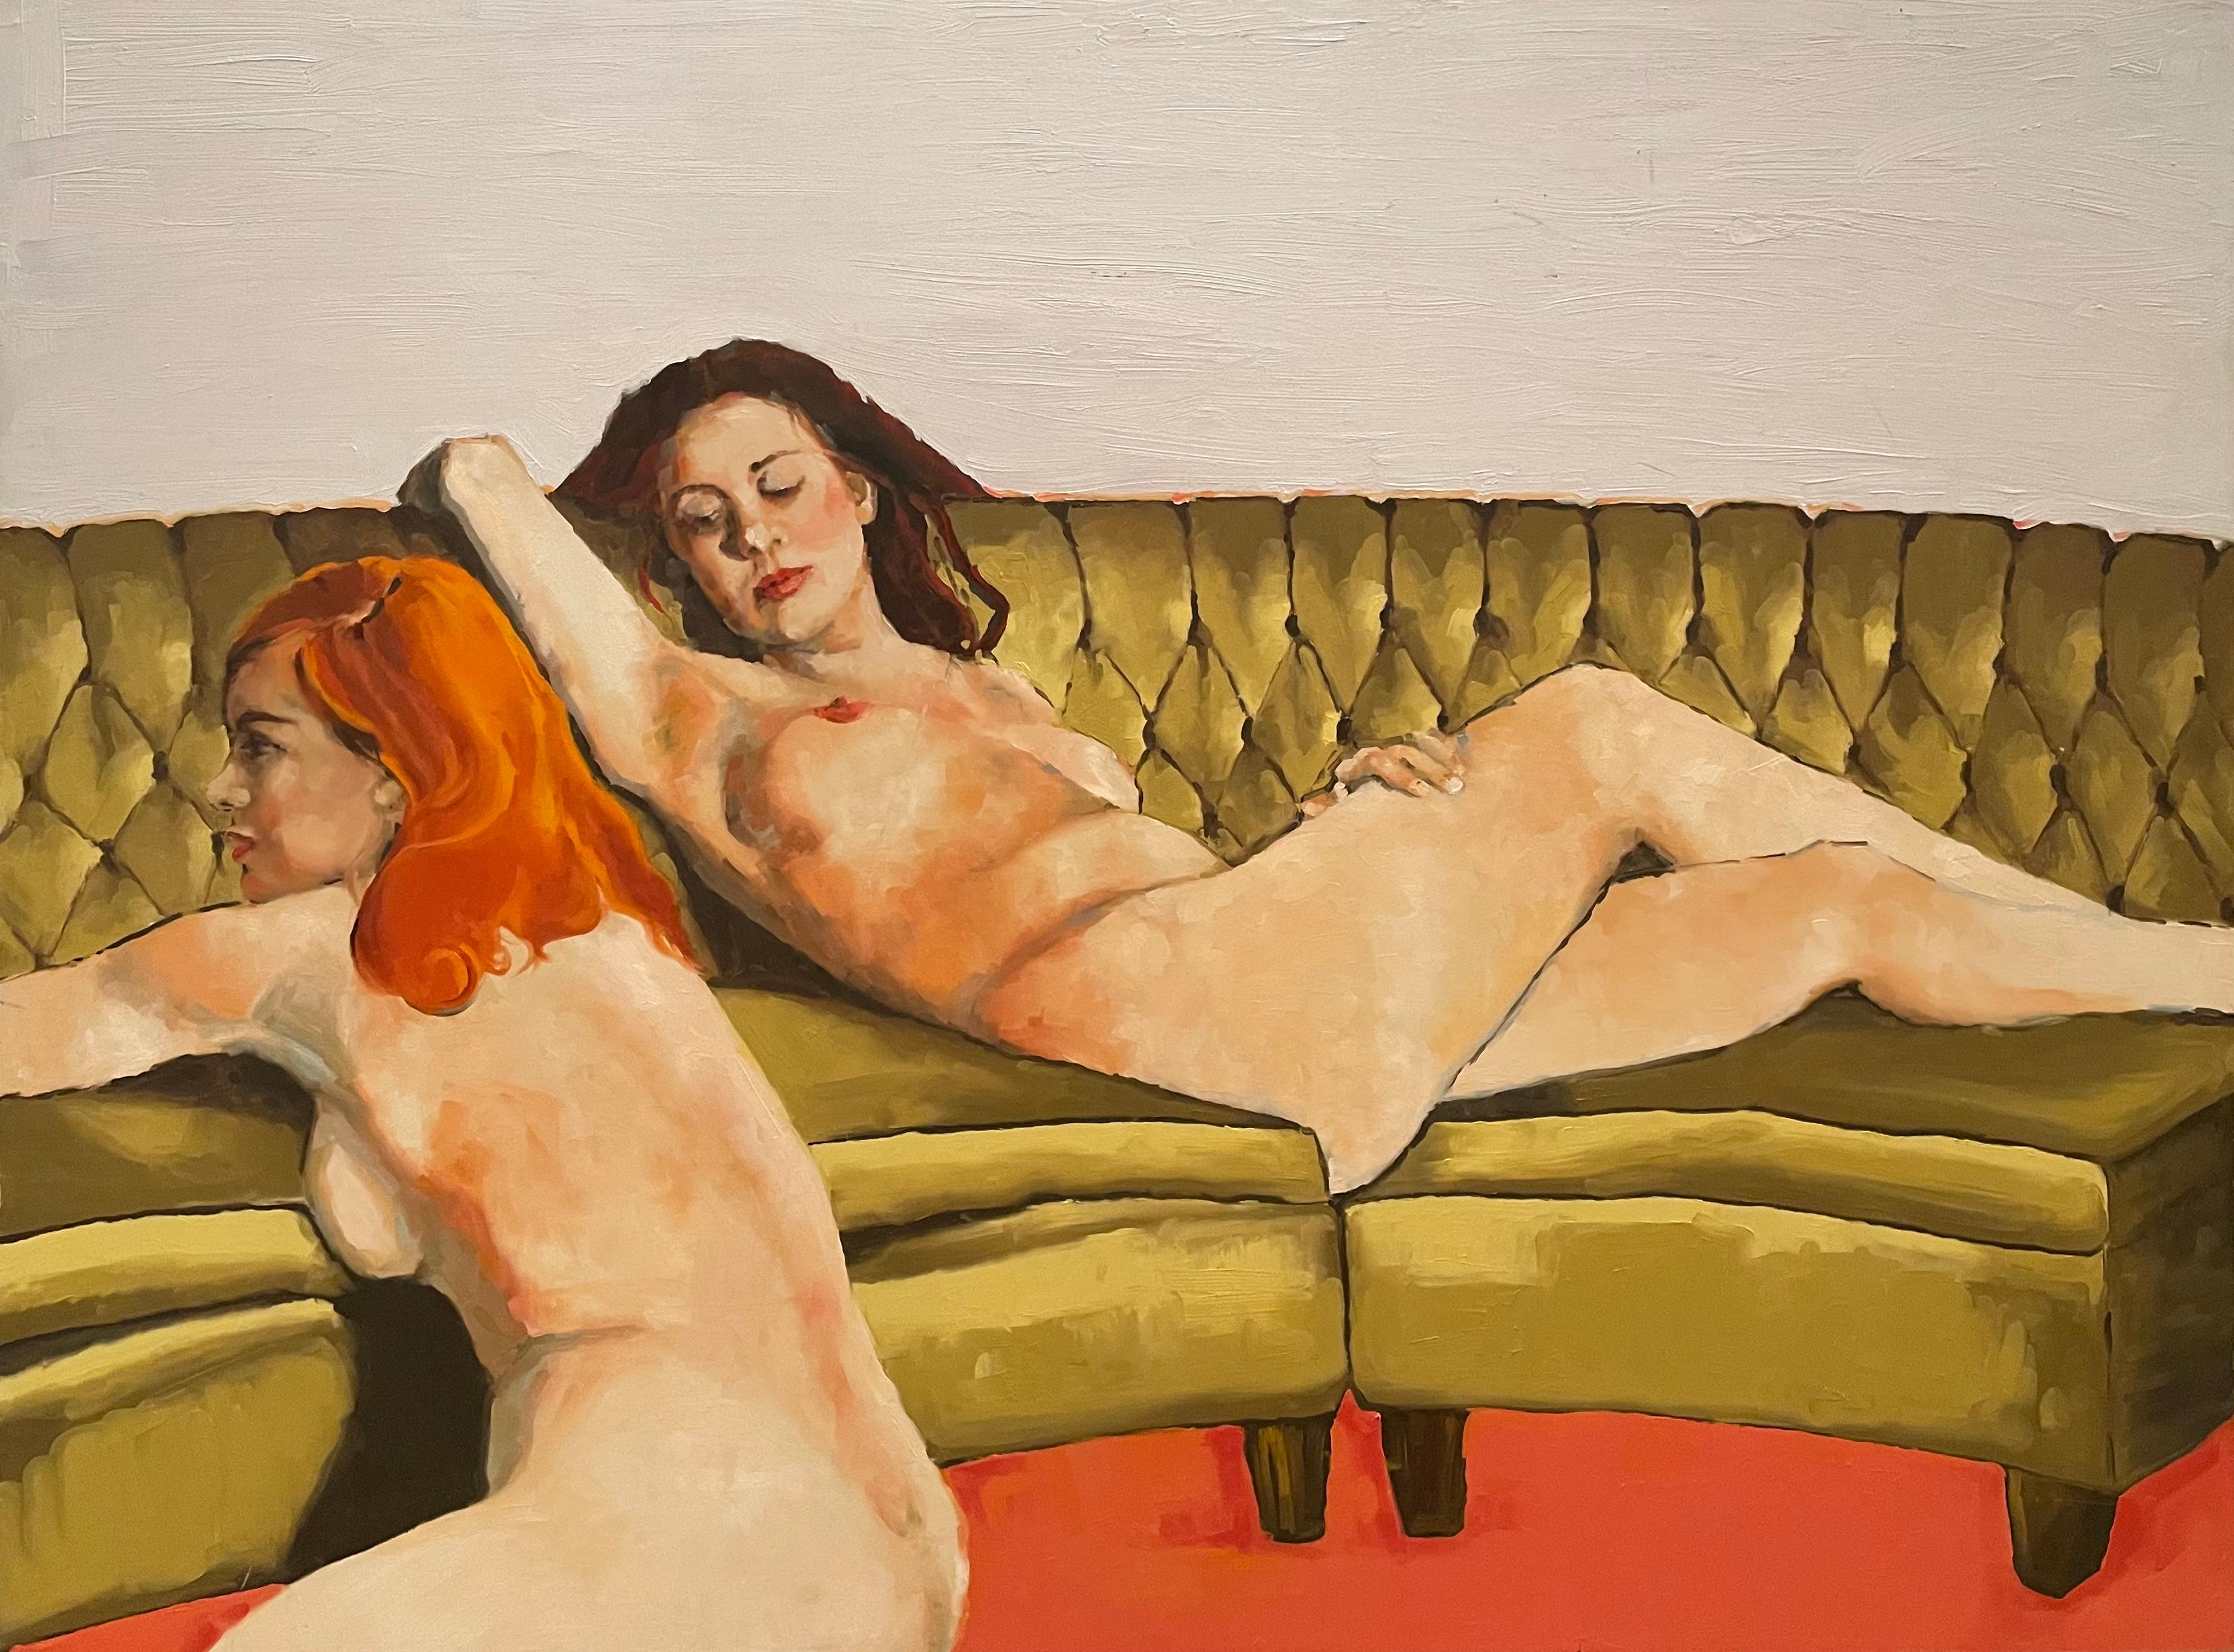 "Two Nude Women on Couch" by renowned artist Shana Wilson presents a striking composition where one woman with orange hair reclines on a light beige couch, while the other, a brunette, sits on the orange-red rug. The contrast of their hair colors